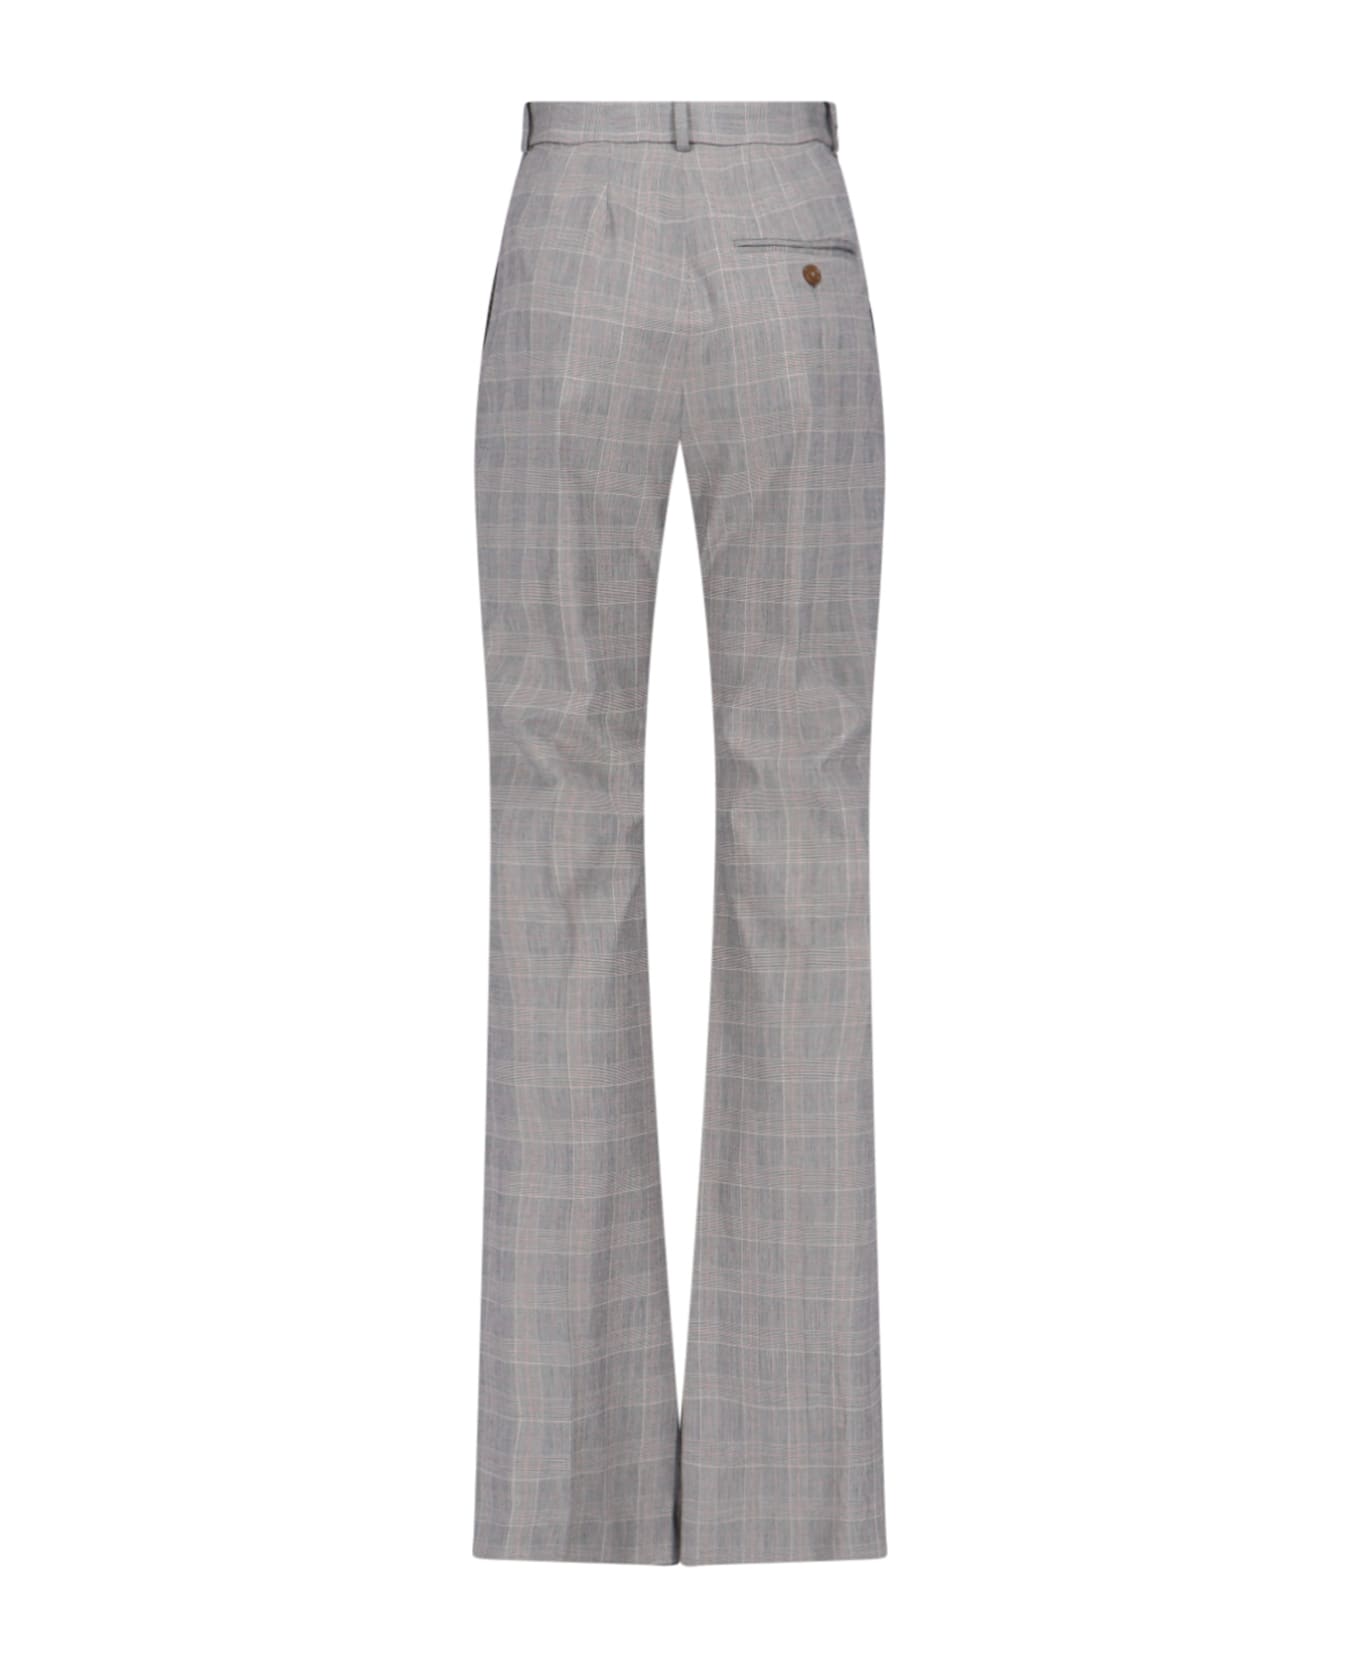 Vivienne Westwood 'ray' Bootcut Trousers - Gray ボトムス